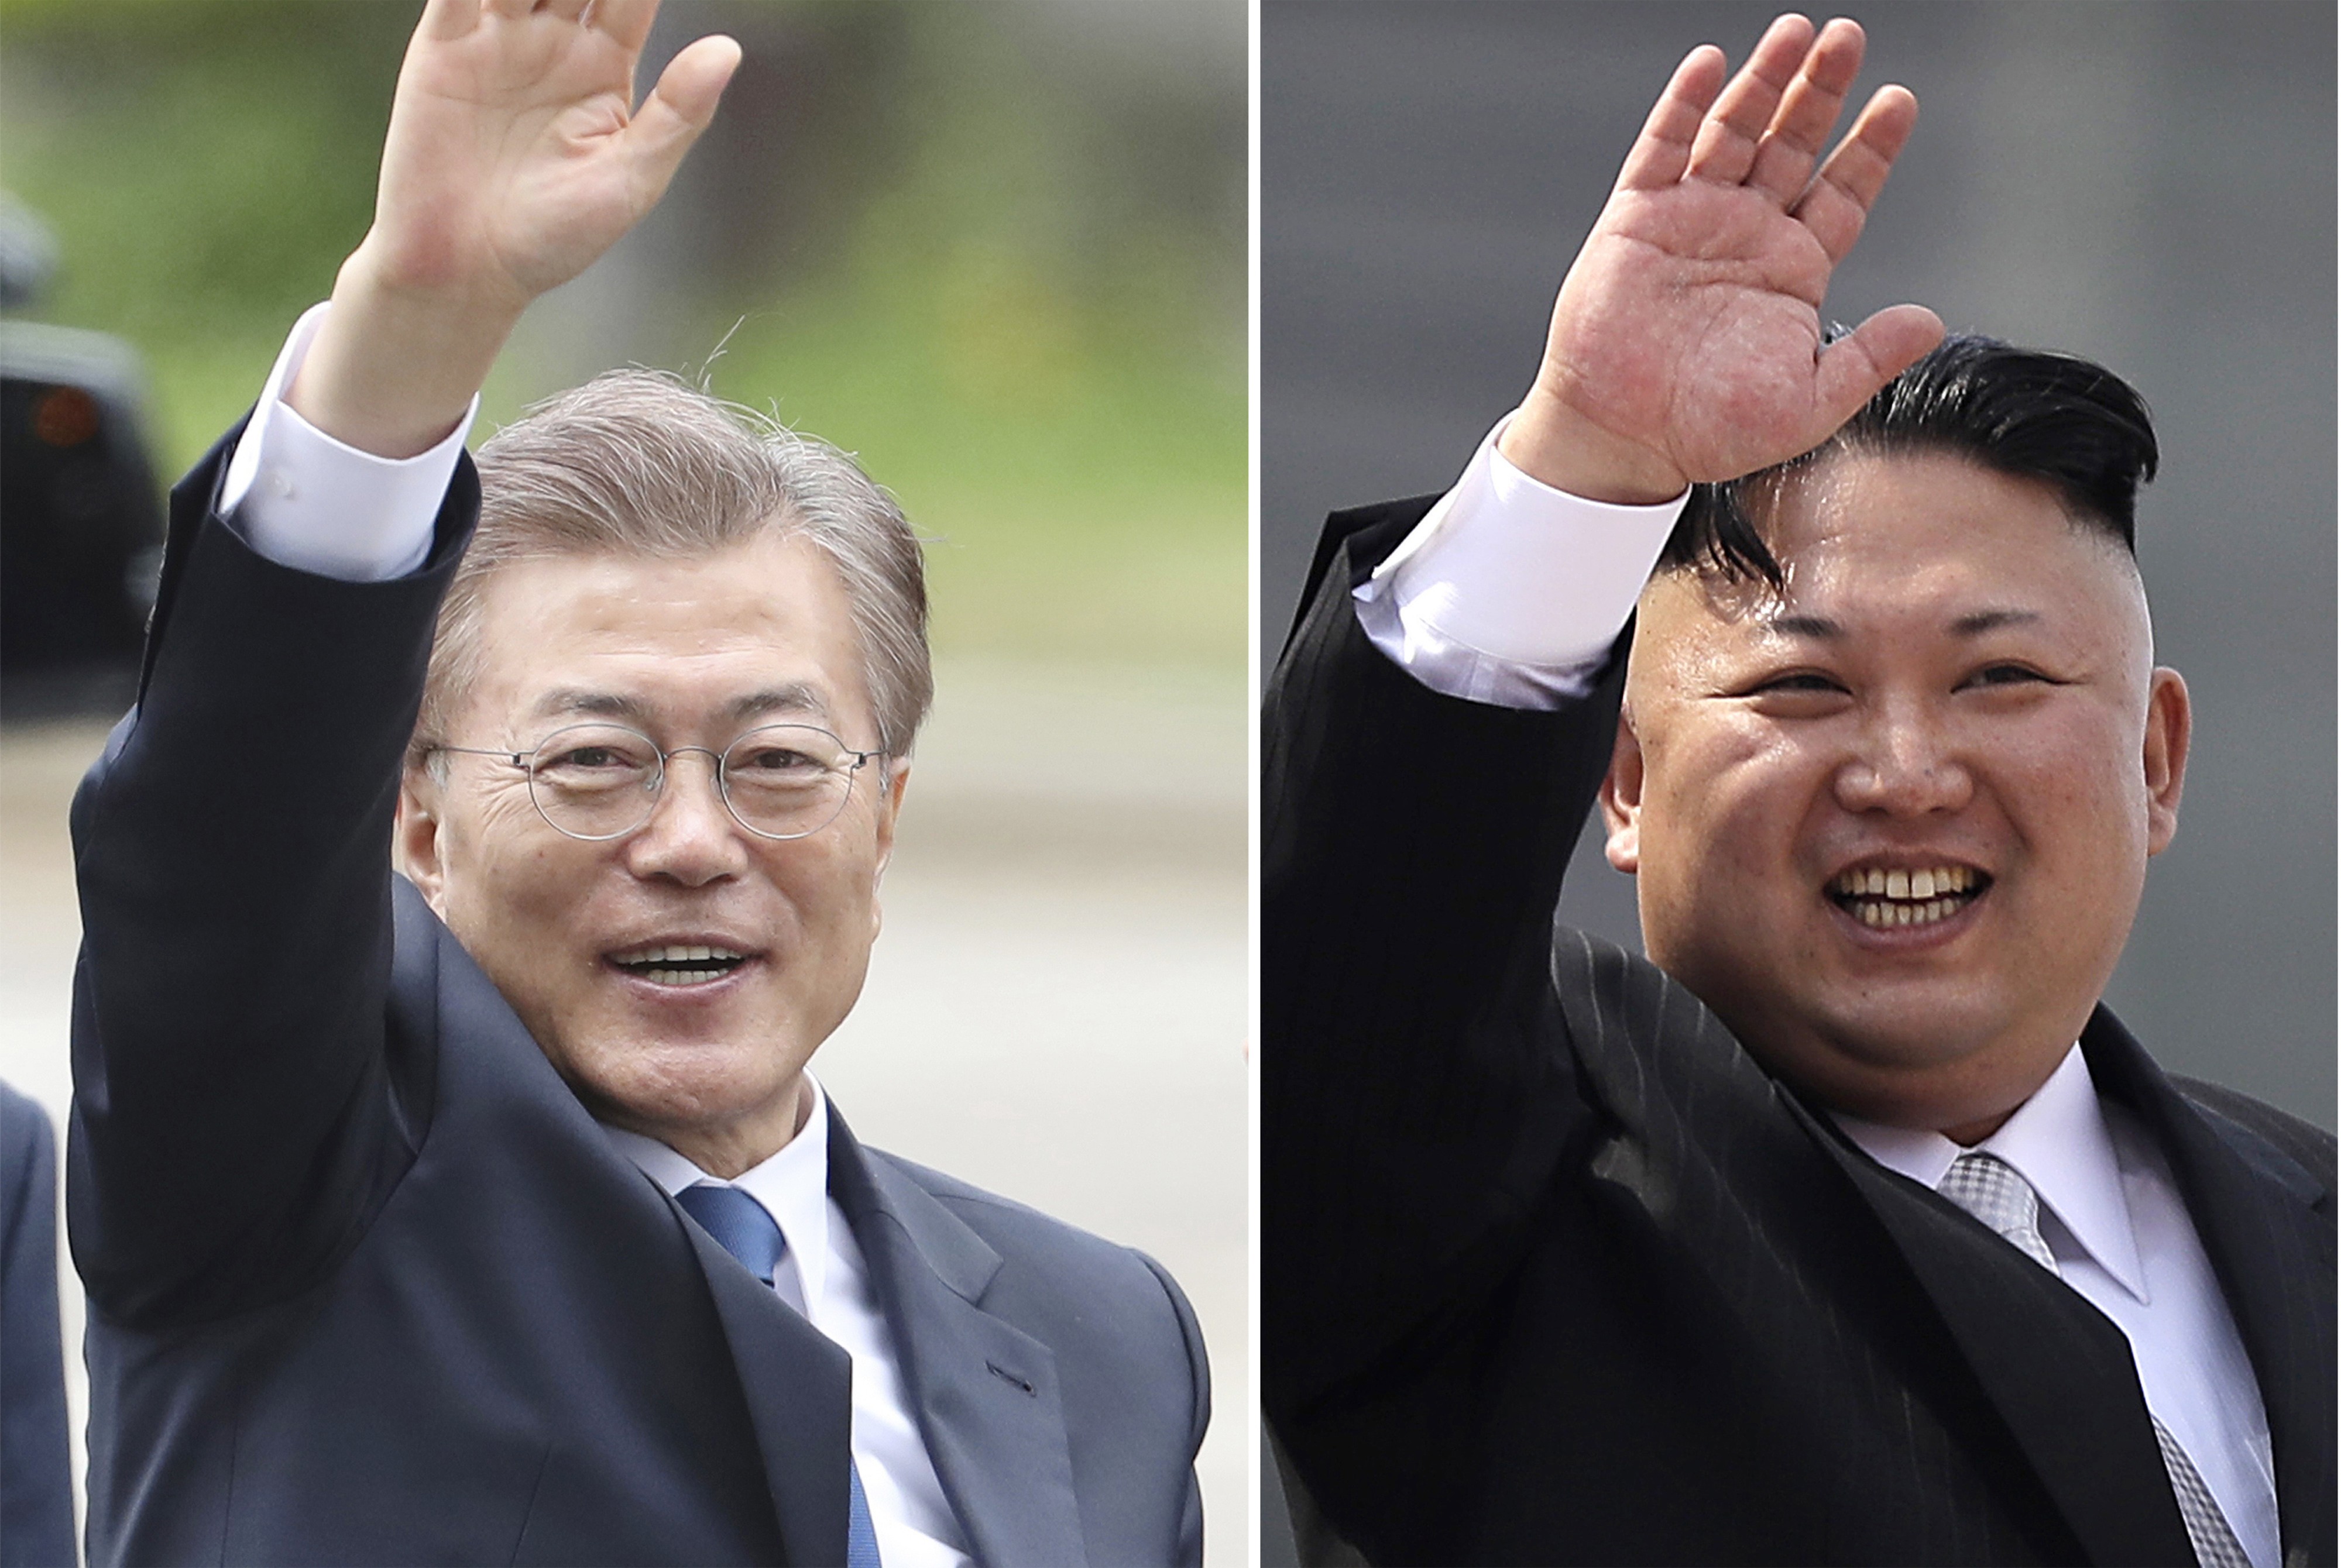 South Korean President Moon Jae-in took a calculated risk in engaging North Korea. If things go right, the Games could make his presidency